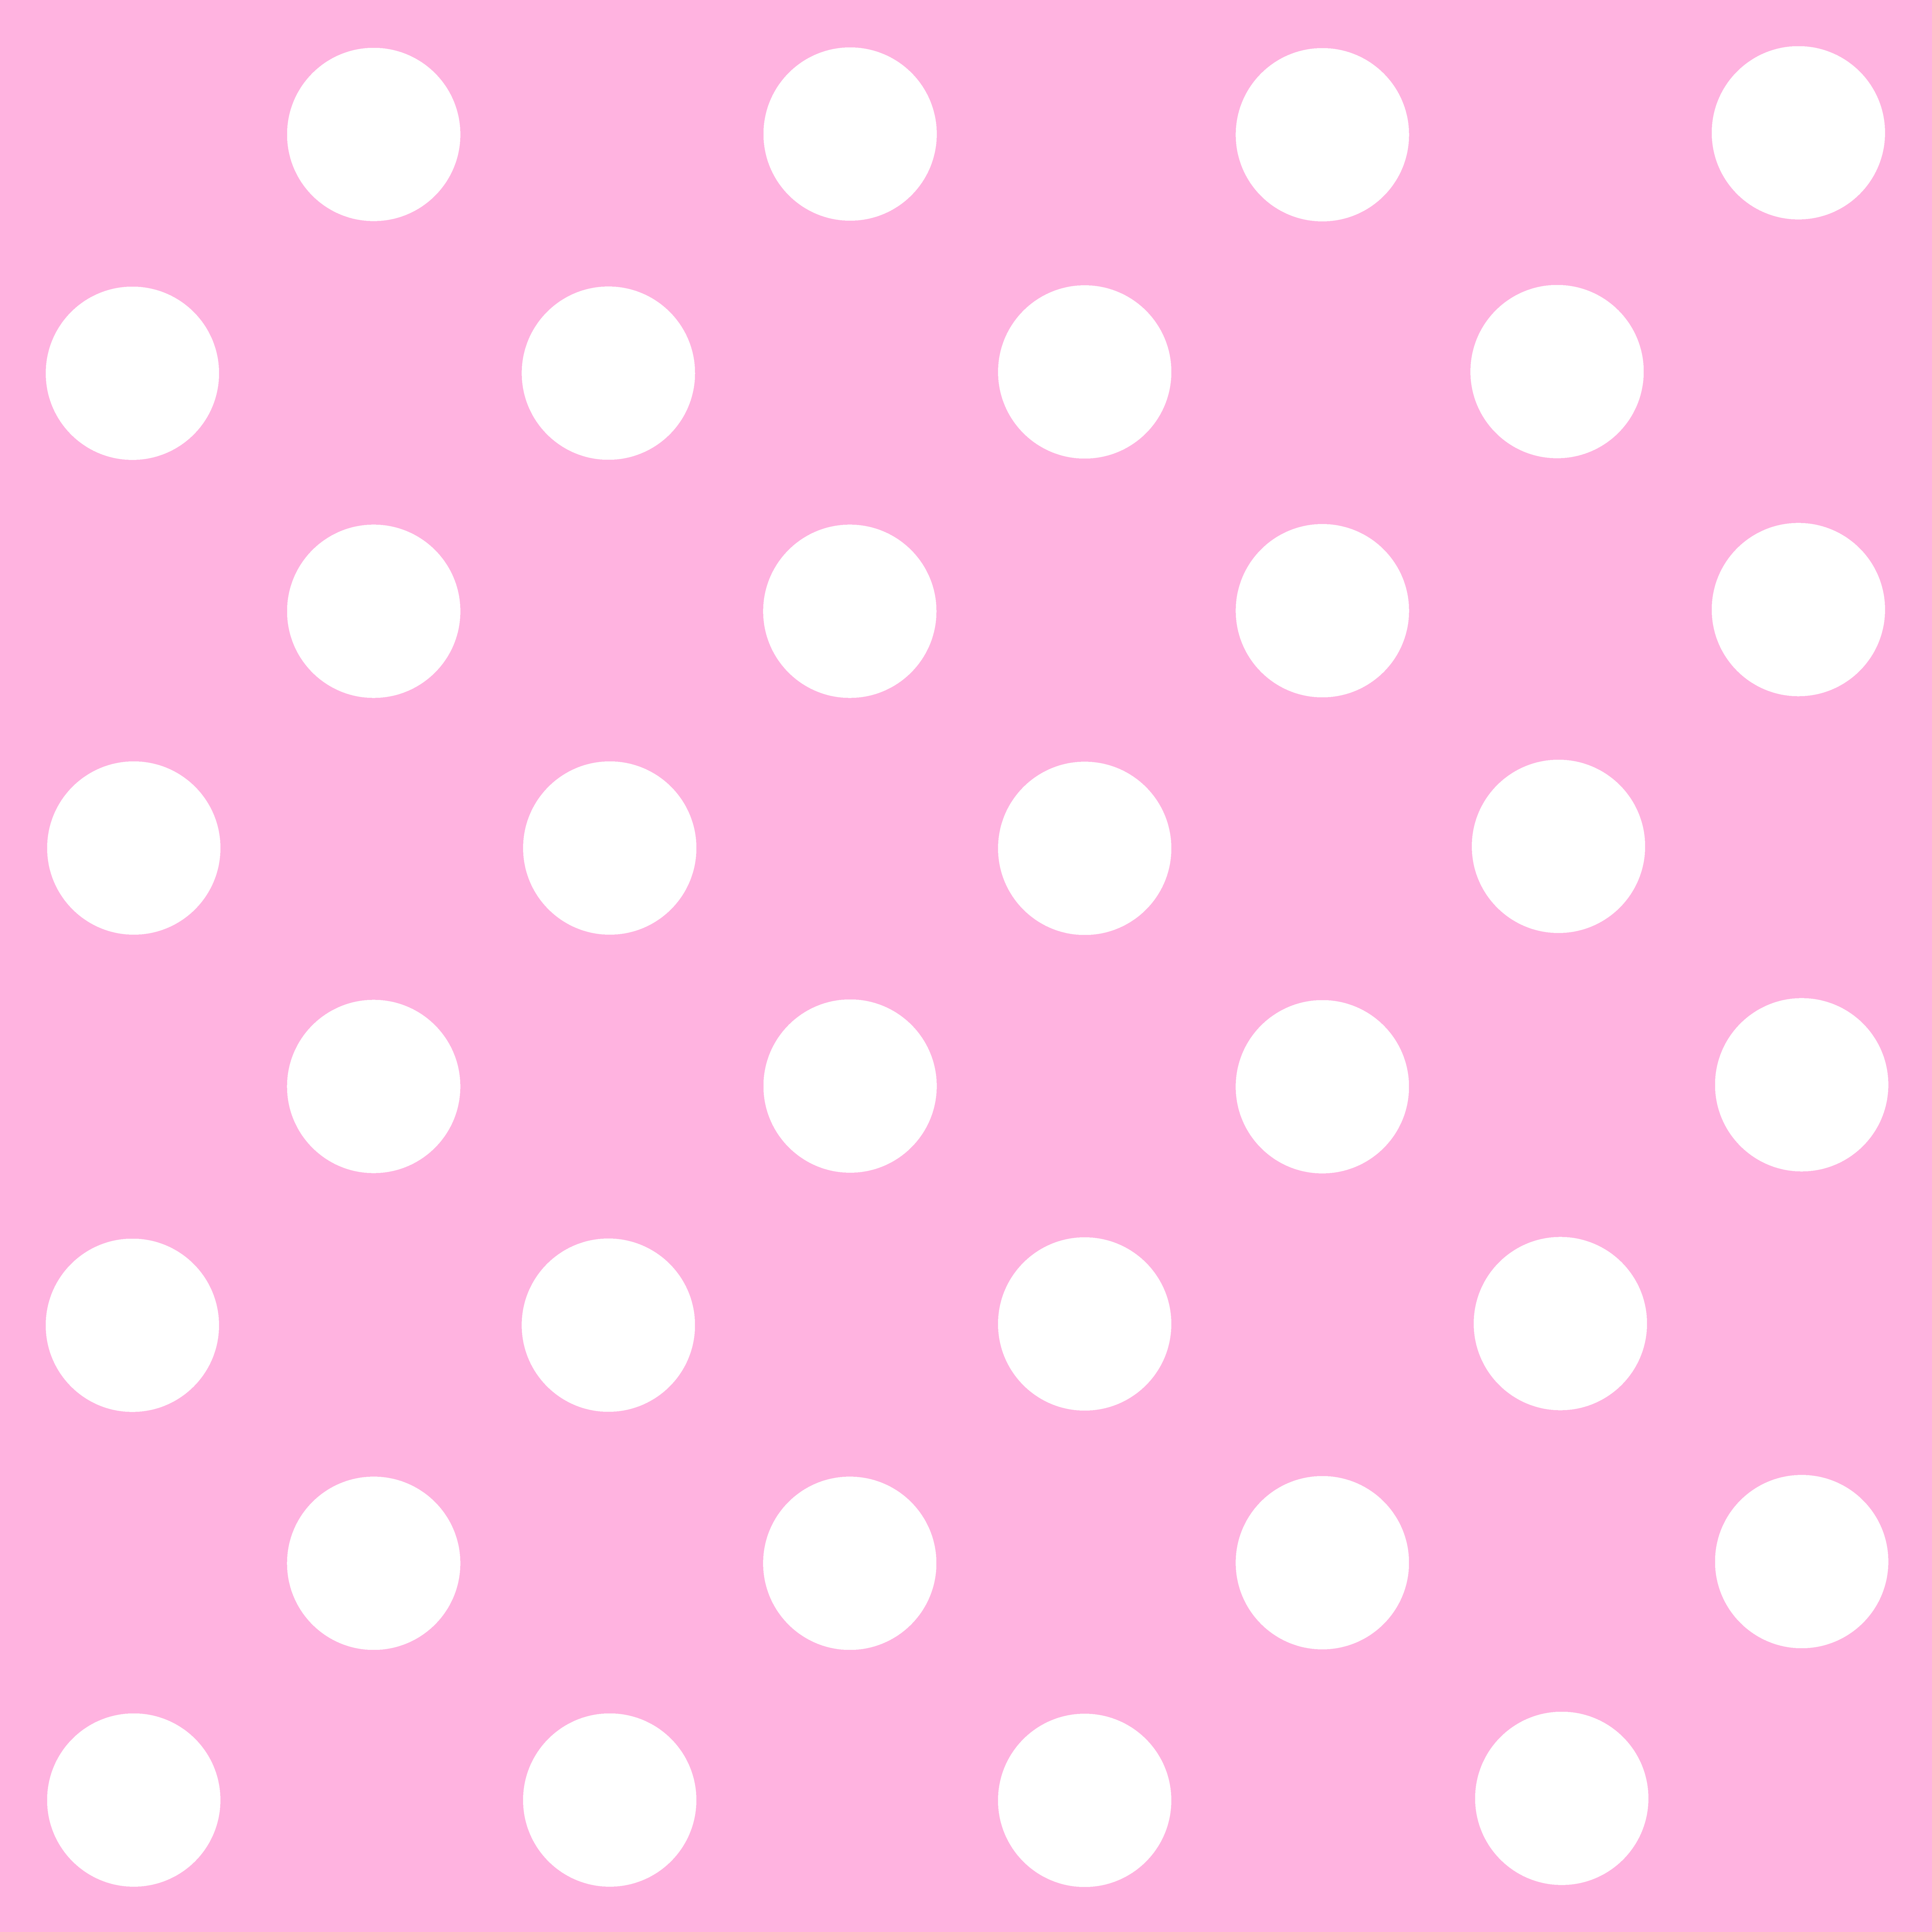 Collection of Pink Polka Dot Clipart. High quality, free